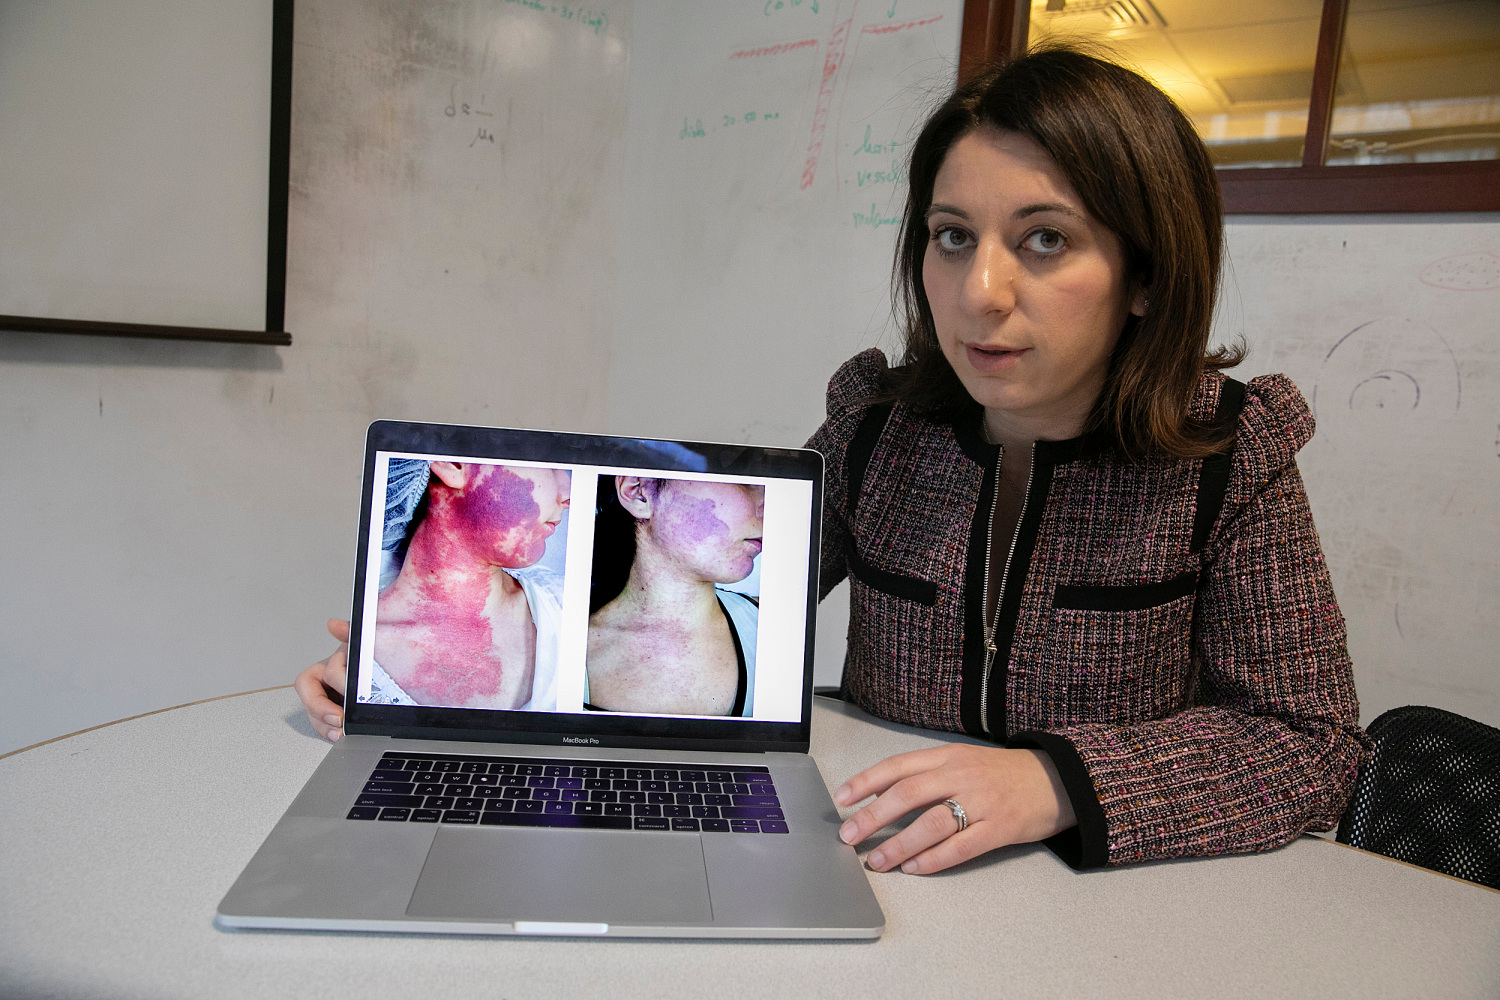 Dr. Lilit Garibyan showing the before and after of surgery on her laptop